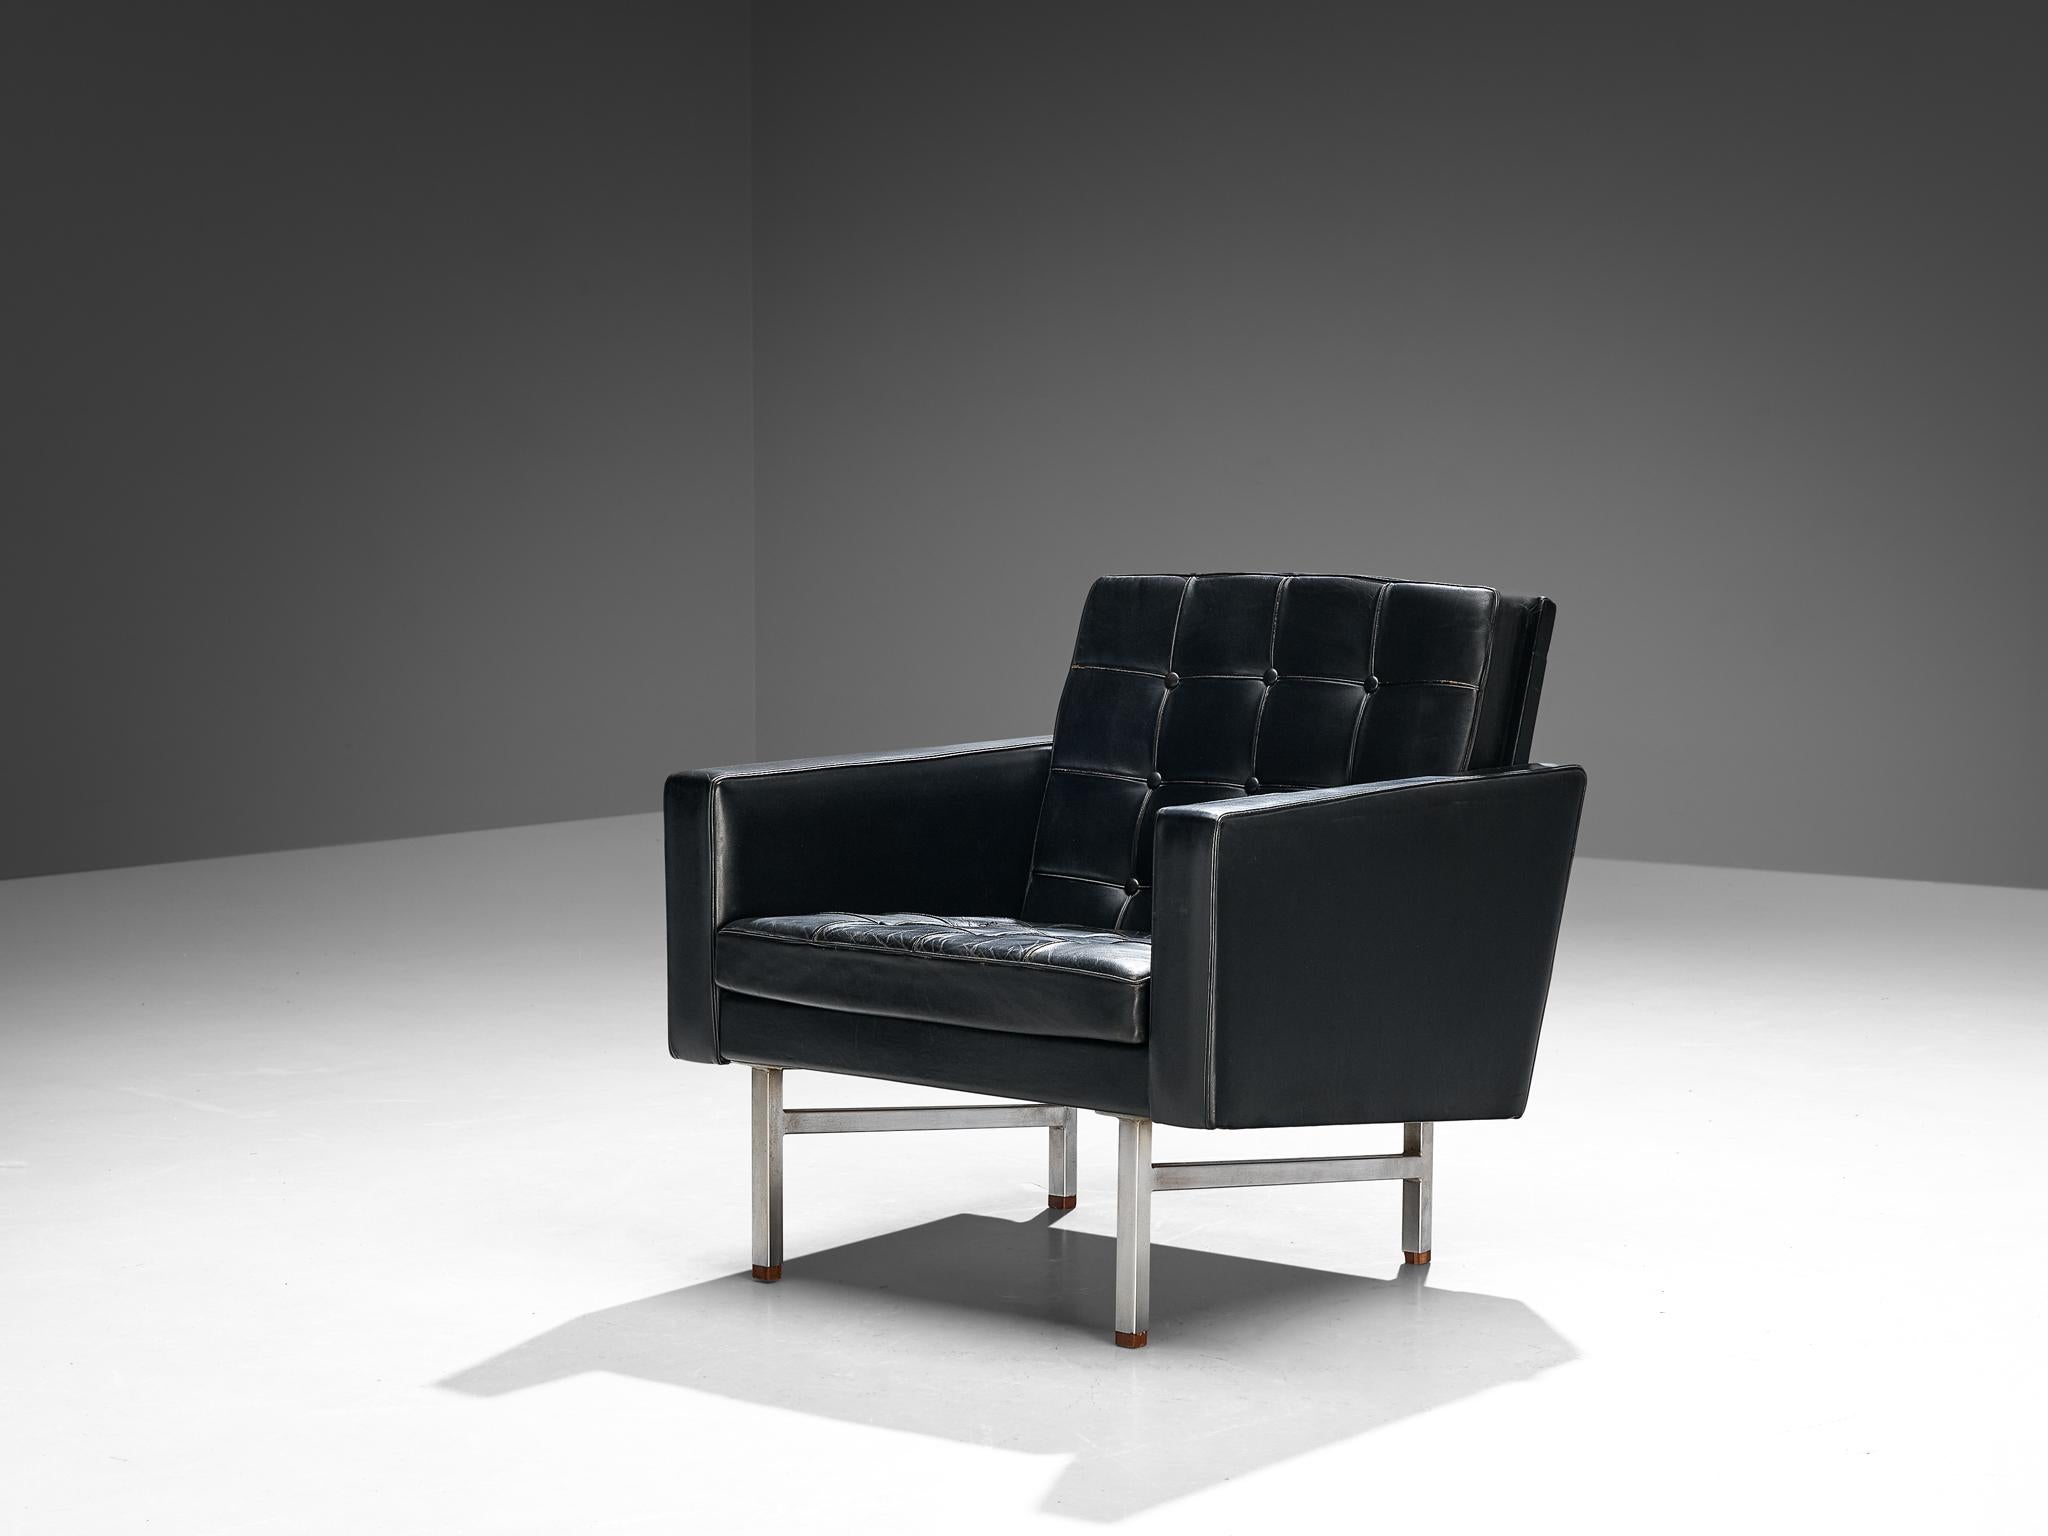 Karl Erik Ekselius, lounge chair, leather, chromed steel, wood, Sweden, 1960s.

This easy chair is executed in original black leather. The tufted seat and back in combination with the clean and straight corpus and polished steel frame gives the